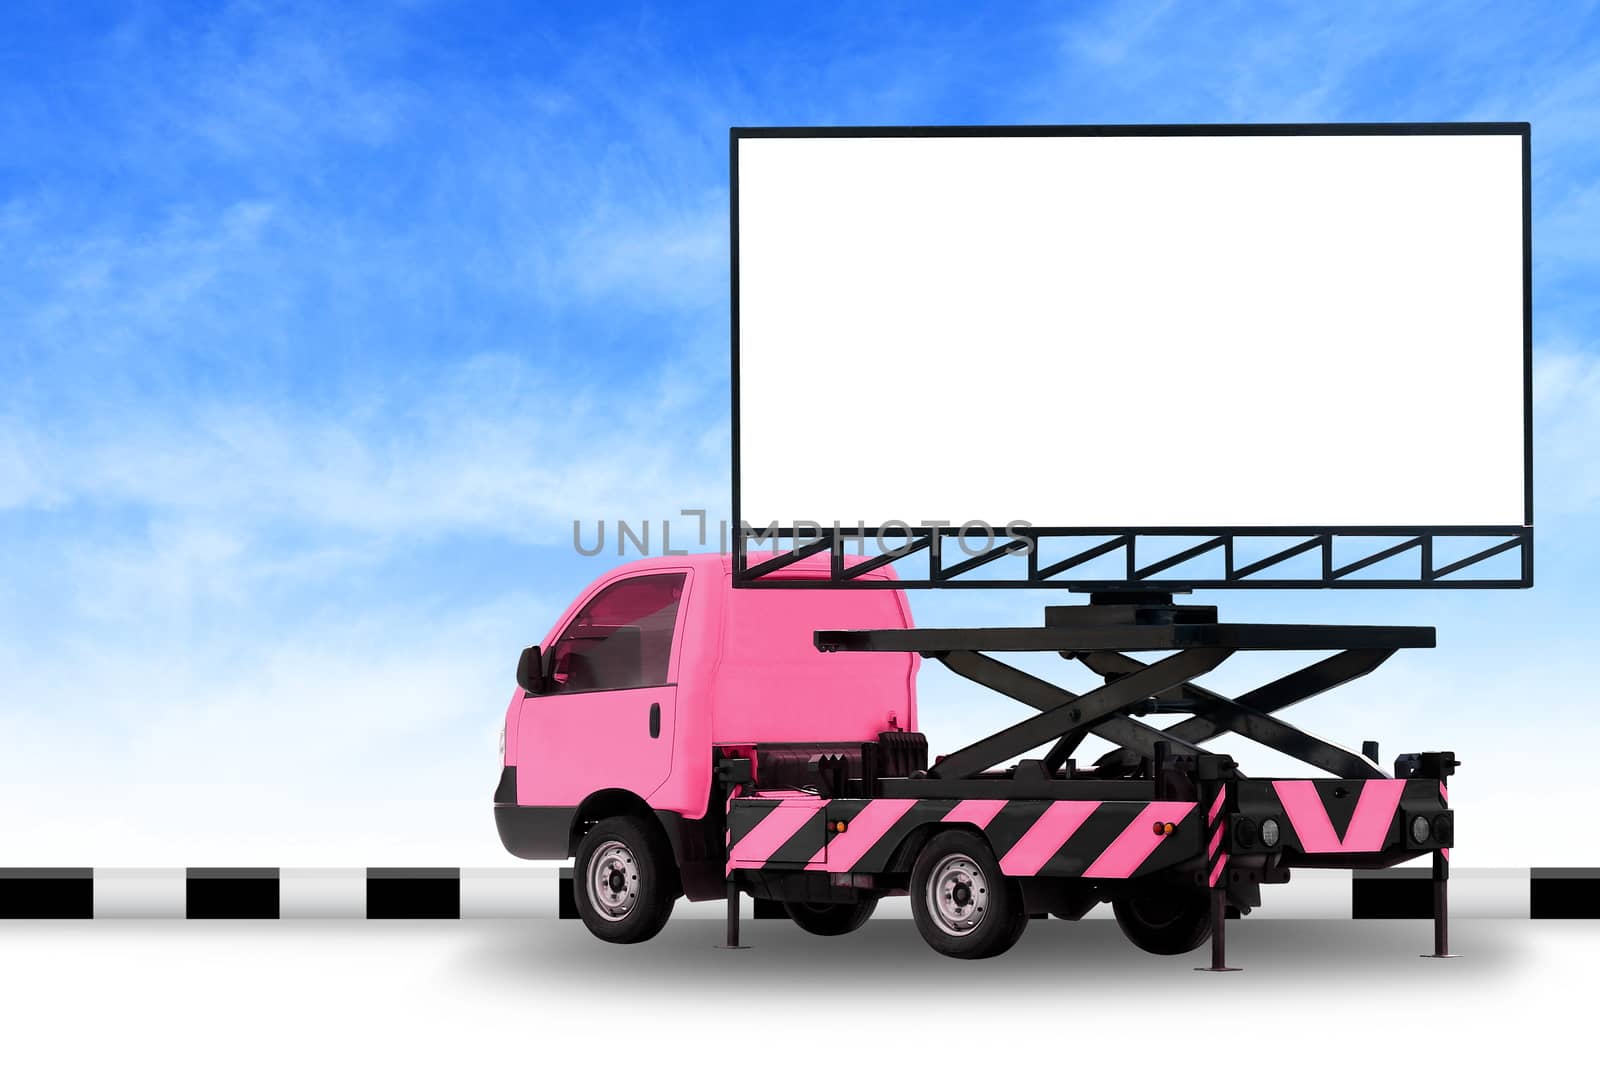 Billboard blank on car pink truck LED panel for sign Advertising isolated on background sky, Large banner and billboard Roadside for an advertisement large